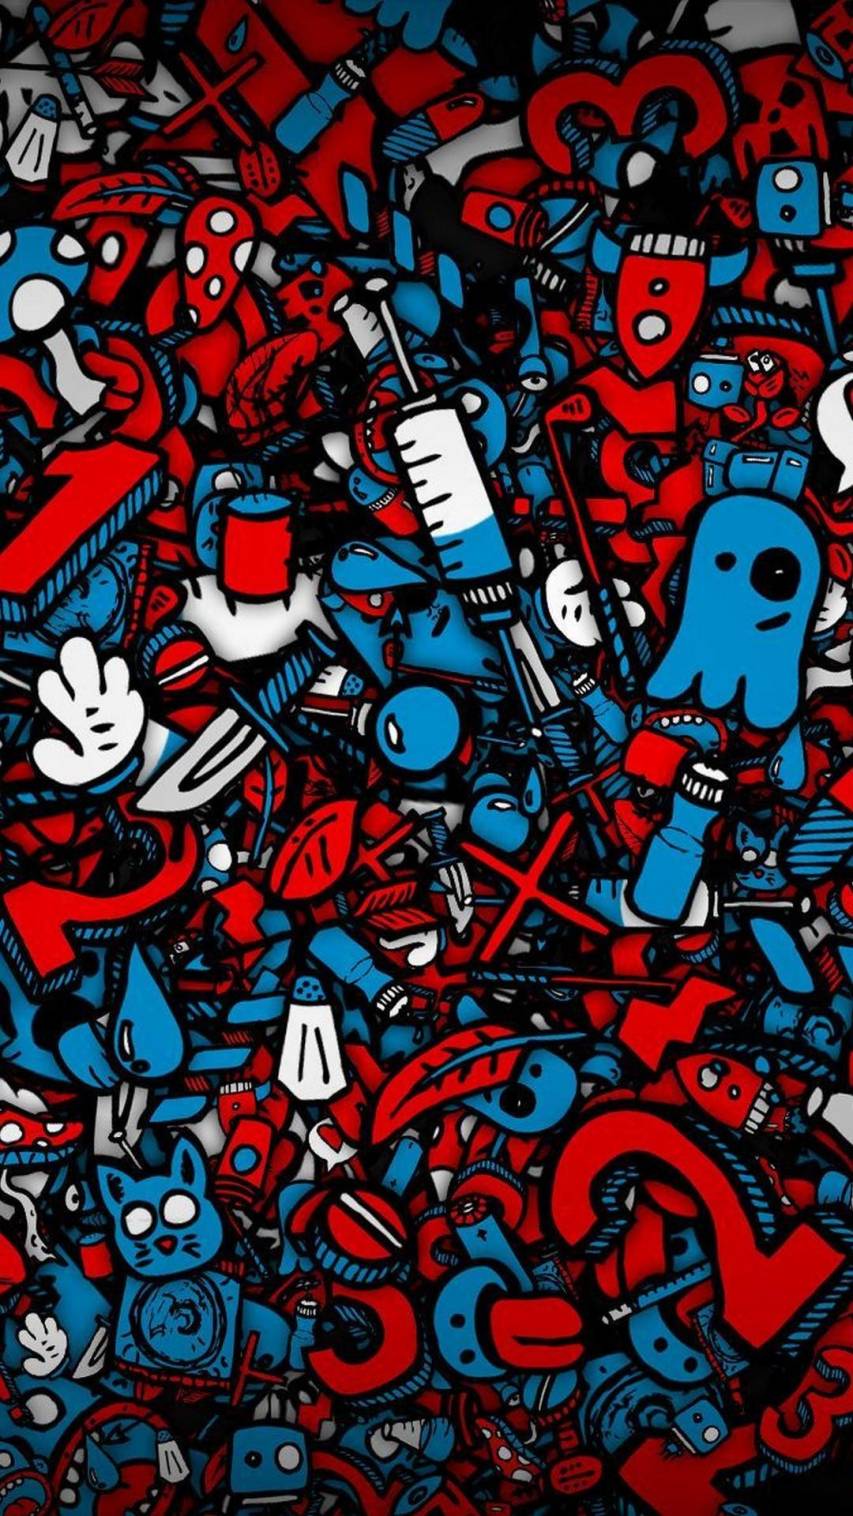 Iphone wallpaper for the ultimate marvel fans - Graffiti